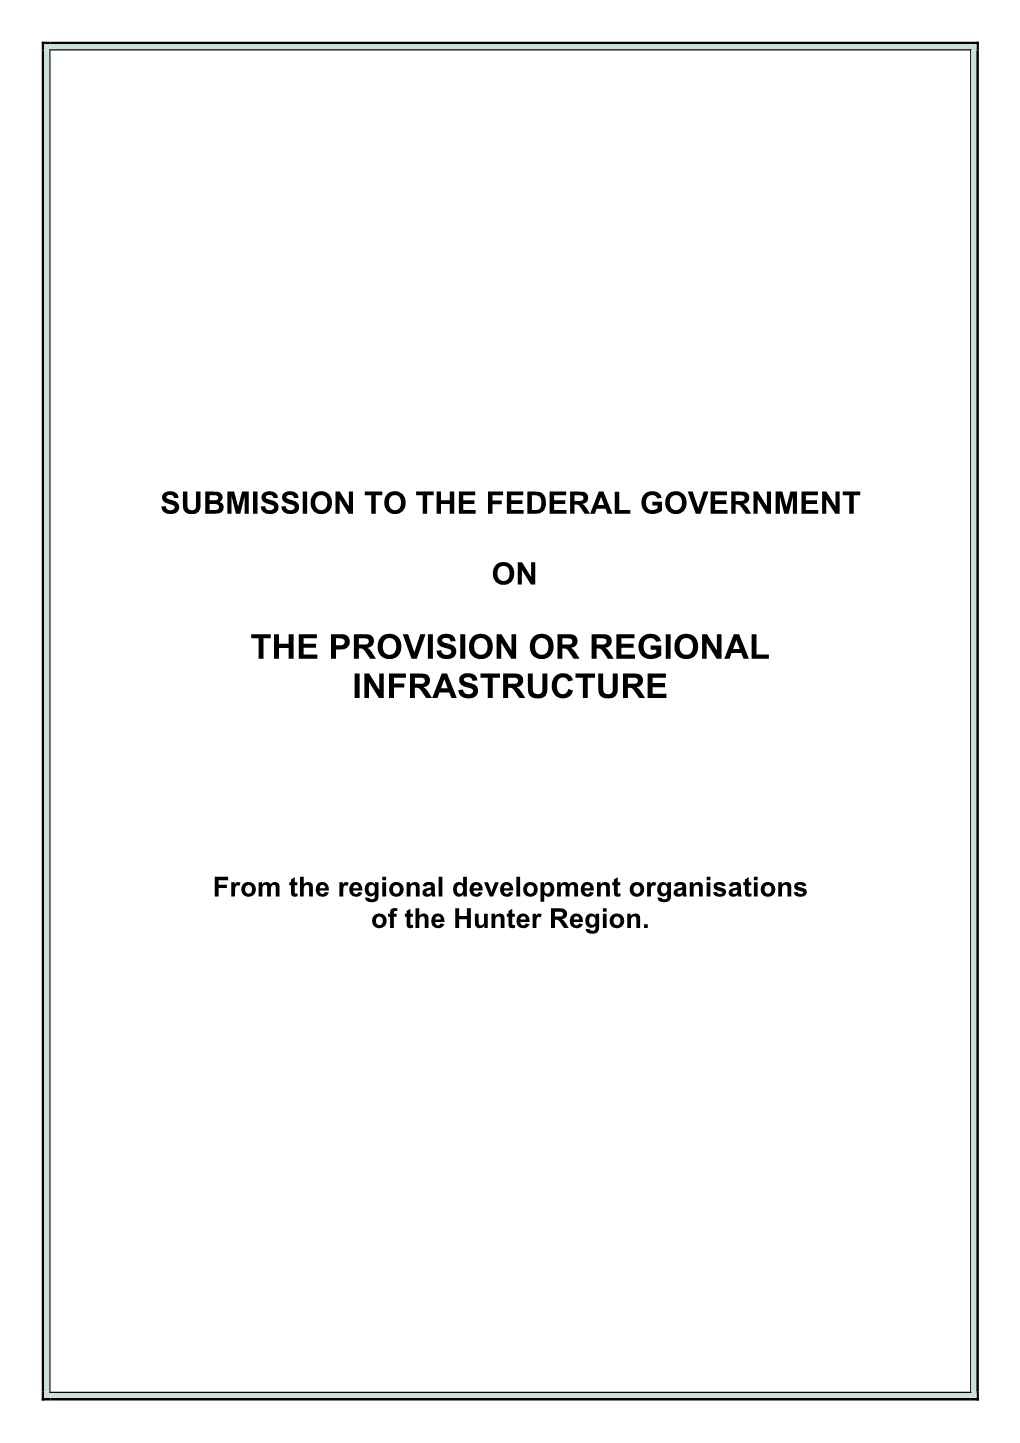 The Provision Or Regional Infrastructure